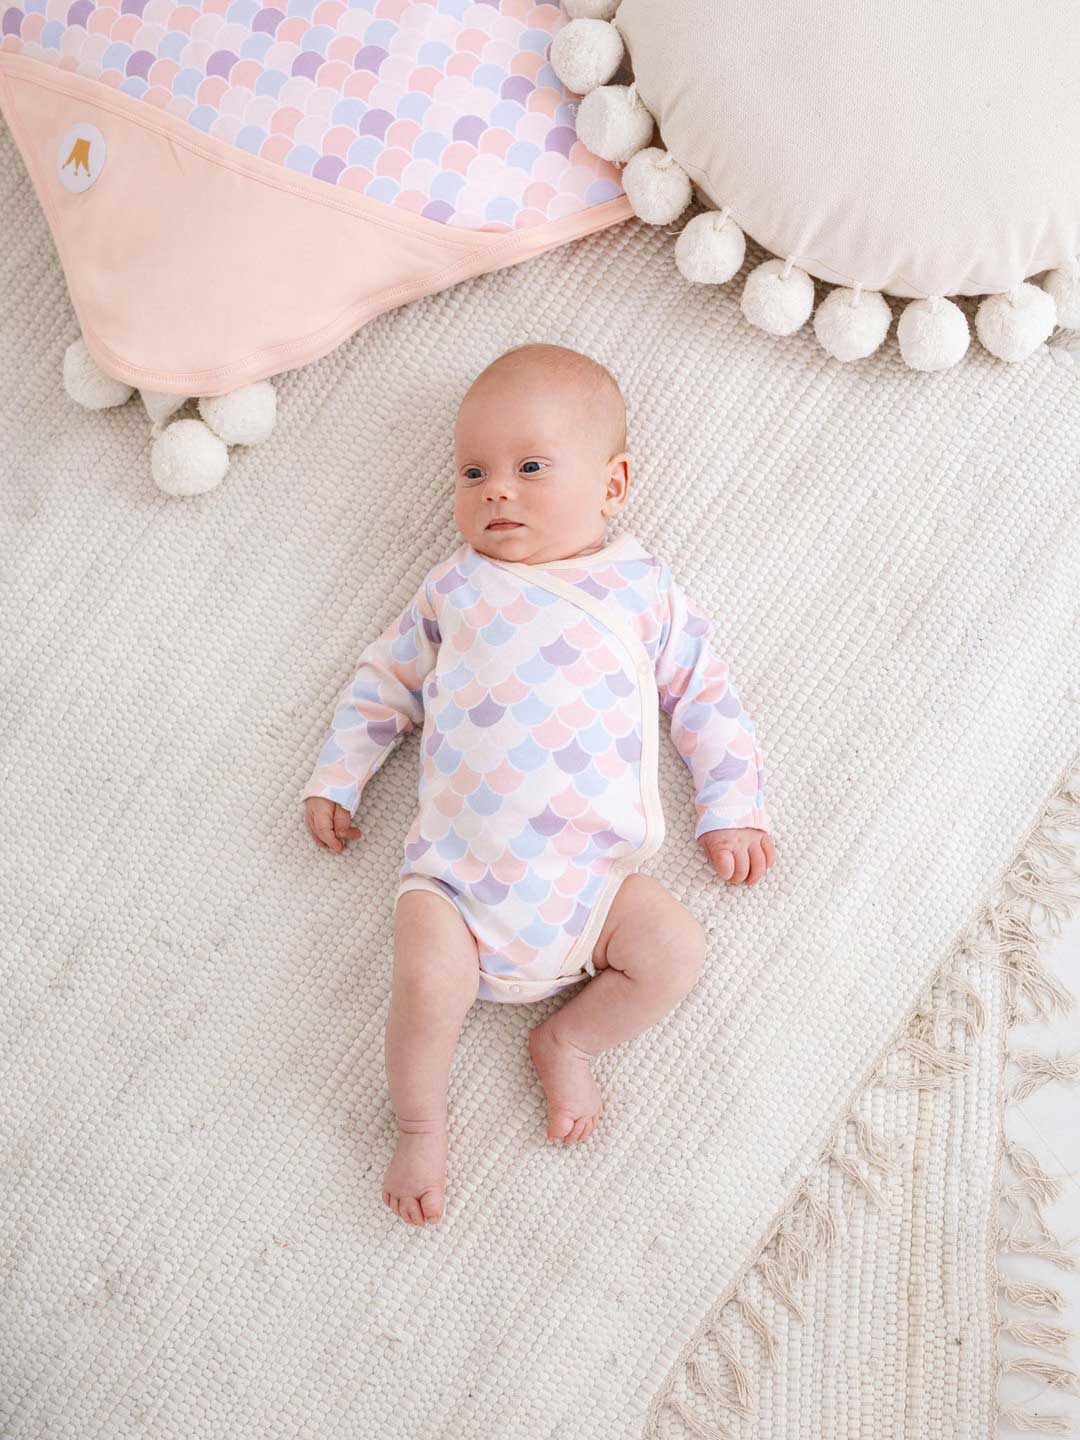 Crafted from 100% cotton, Infant Bodysuit Gold Fish 301 has been responsibly sourced according to Oeko-Tex Standard 100 and is an absolute must-have addition to your little one’s wardrobe.